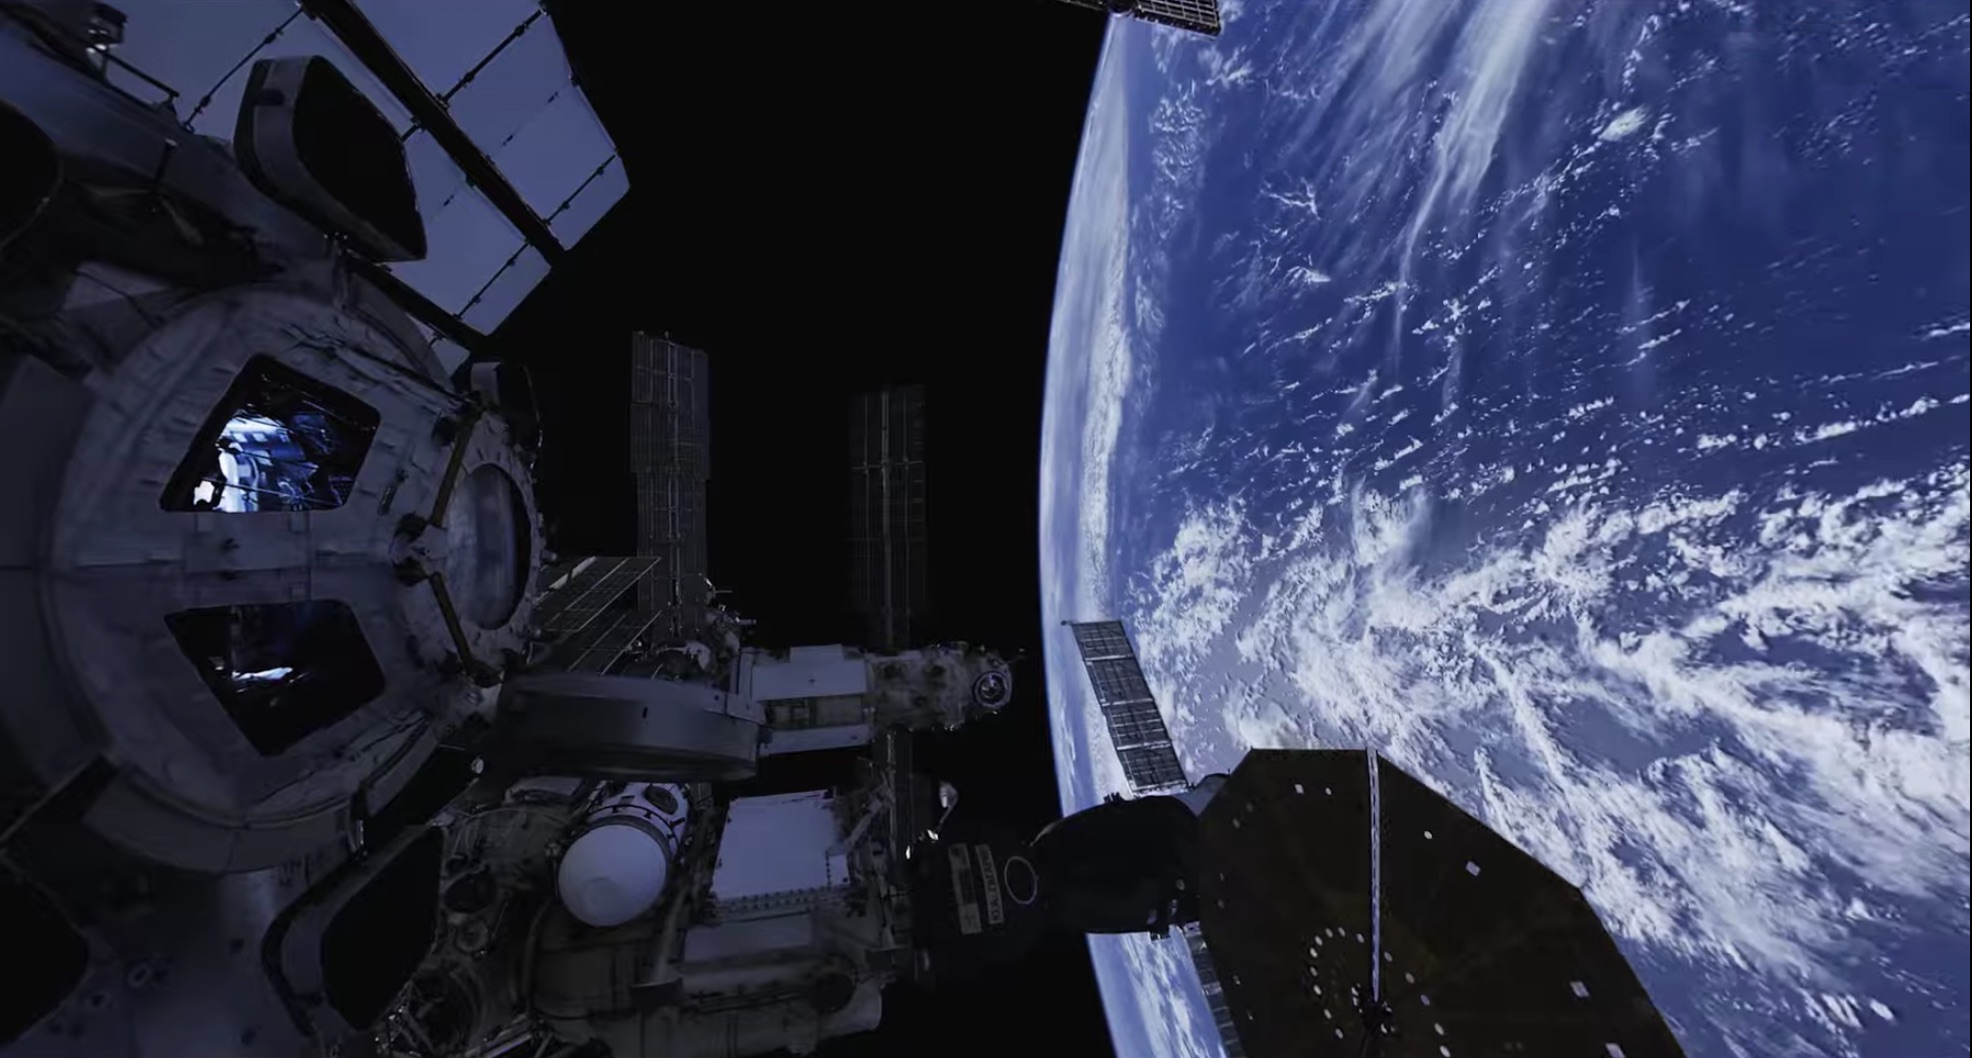 Experience the Overview Effect with the Felix & Paul VR trilogy ‘Space Explorers: Blue Marble’